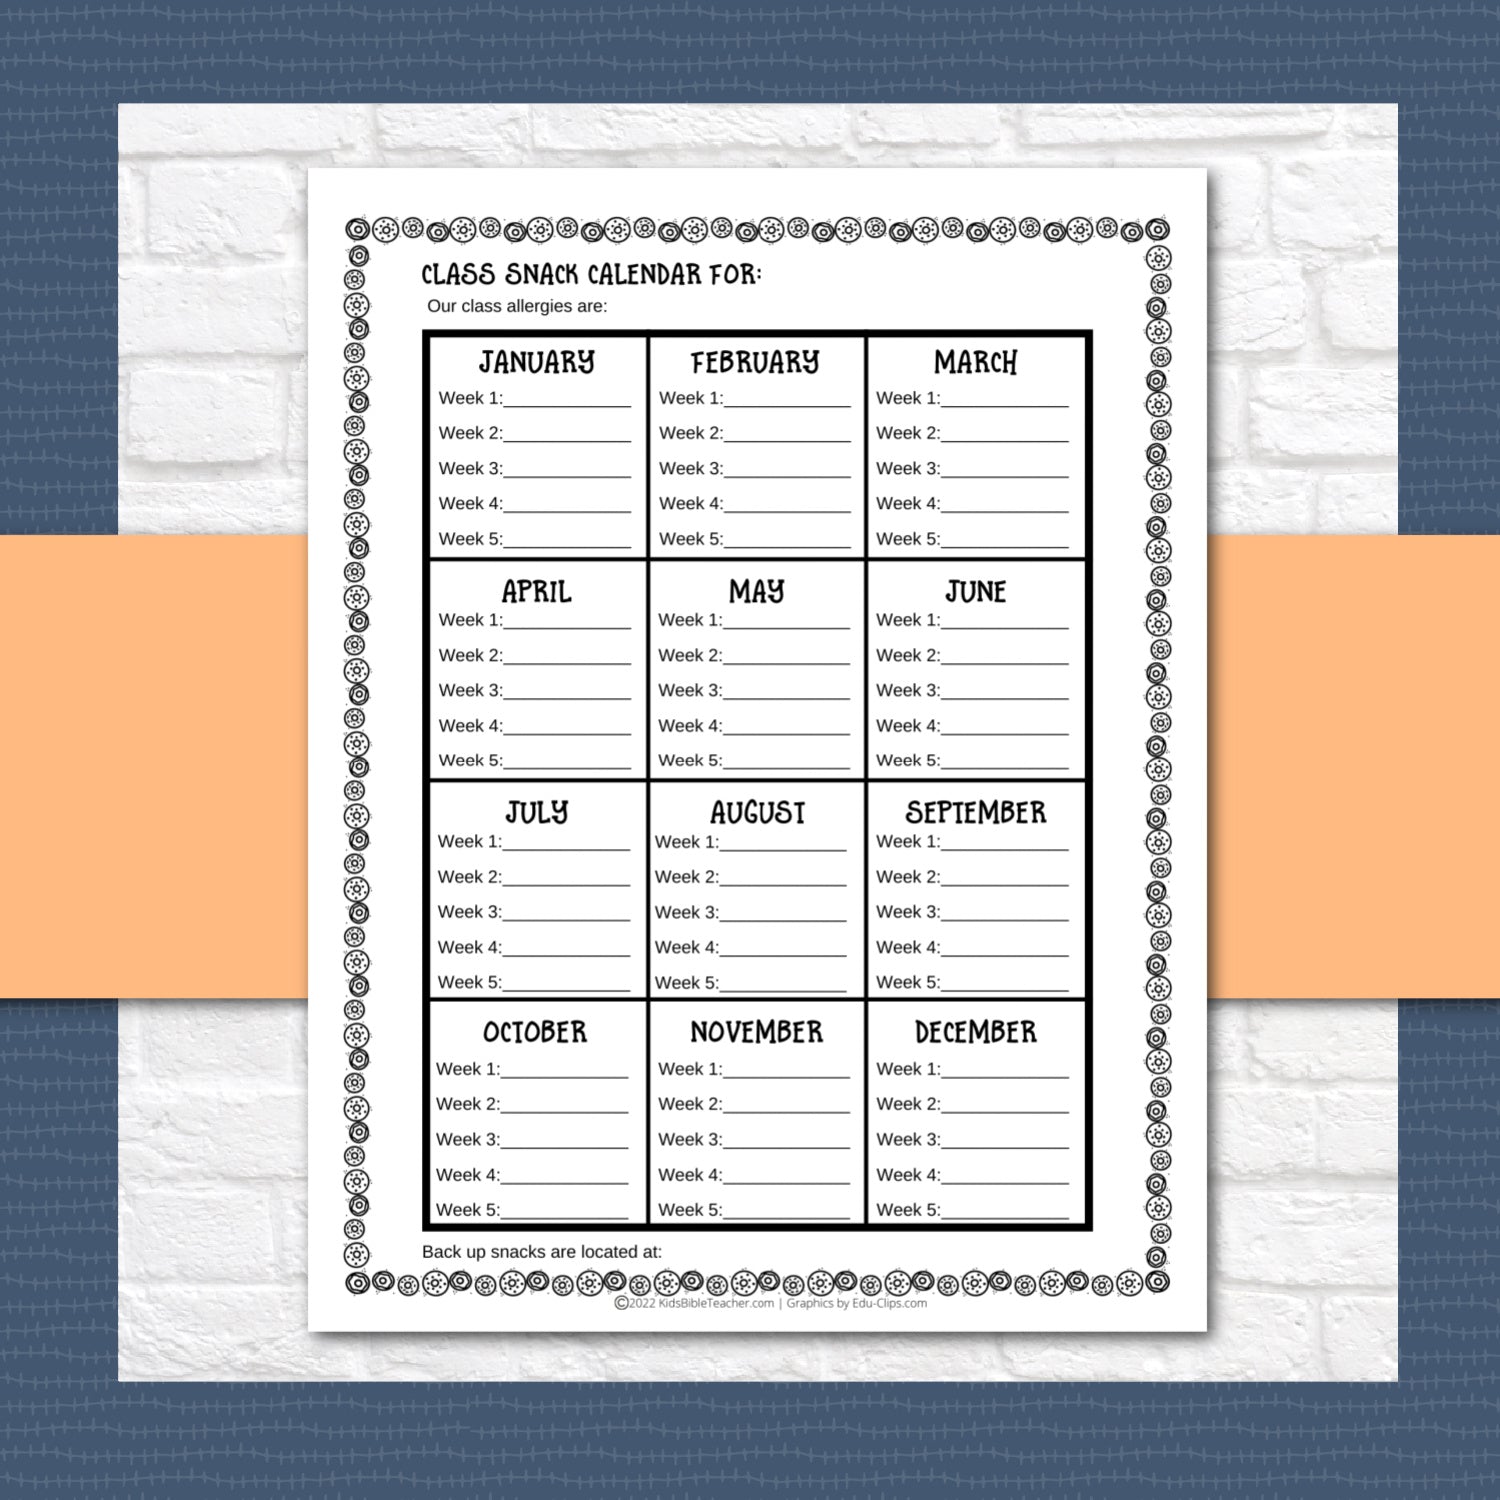 Weekly Classroom Snack Forms for Sunday School or Weekly Bible Club